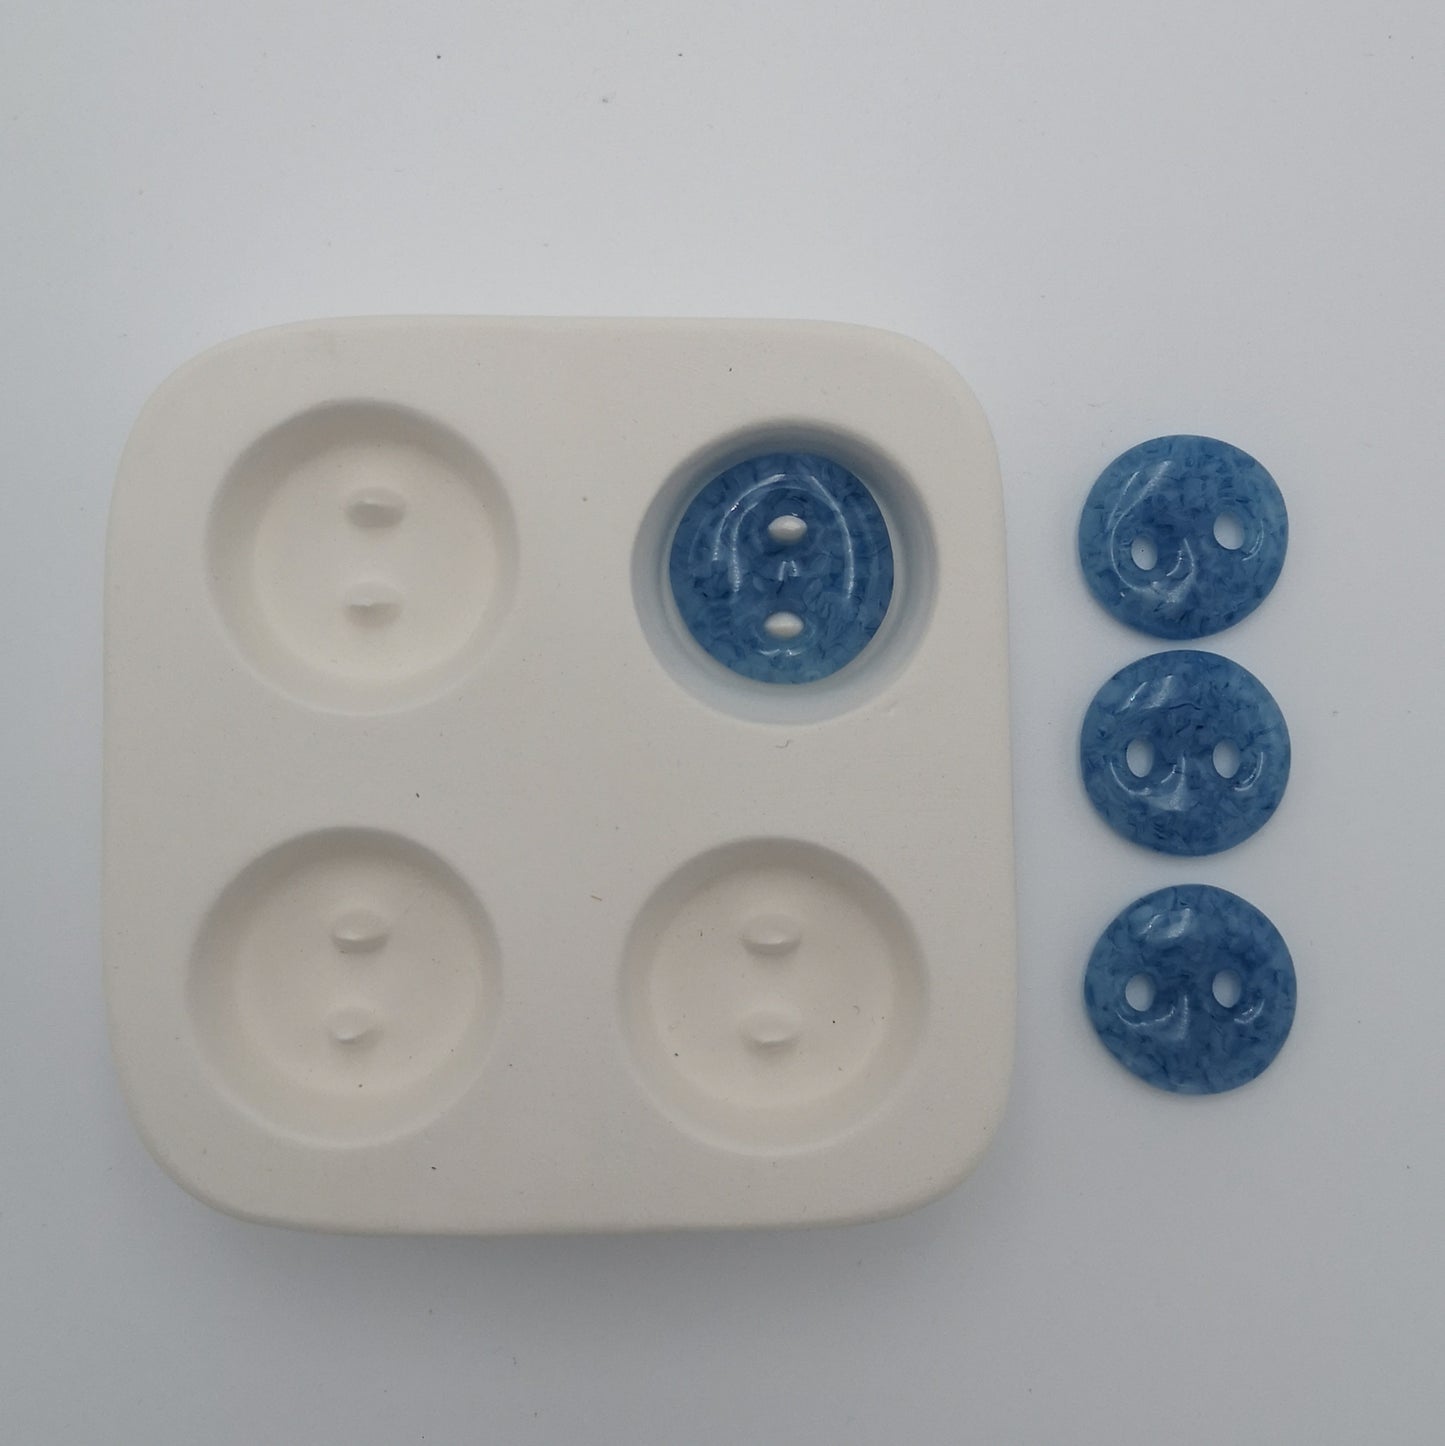 Small Round Button Mold